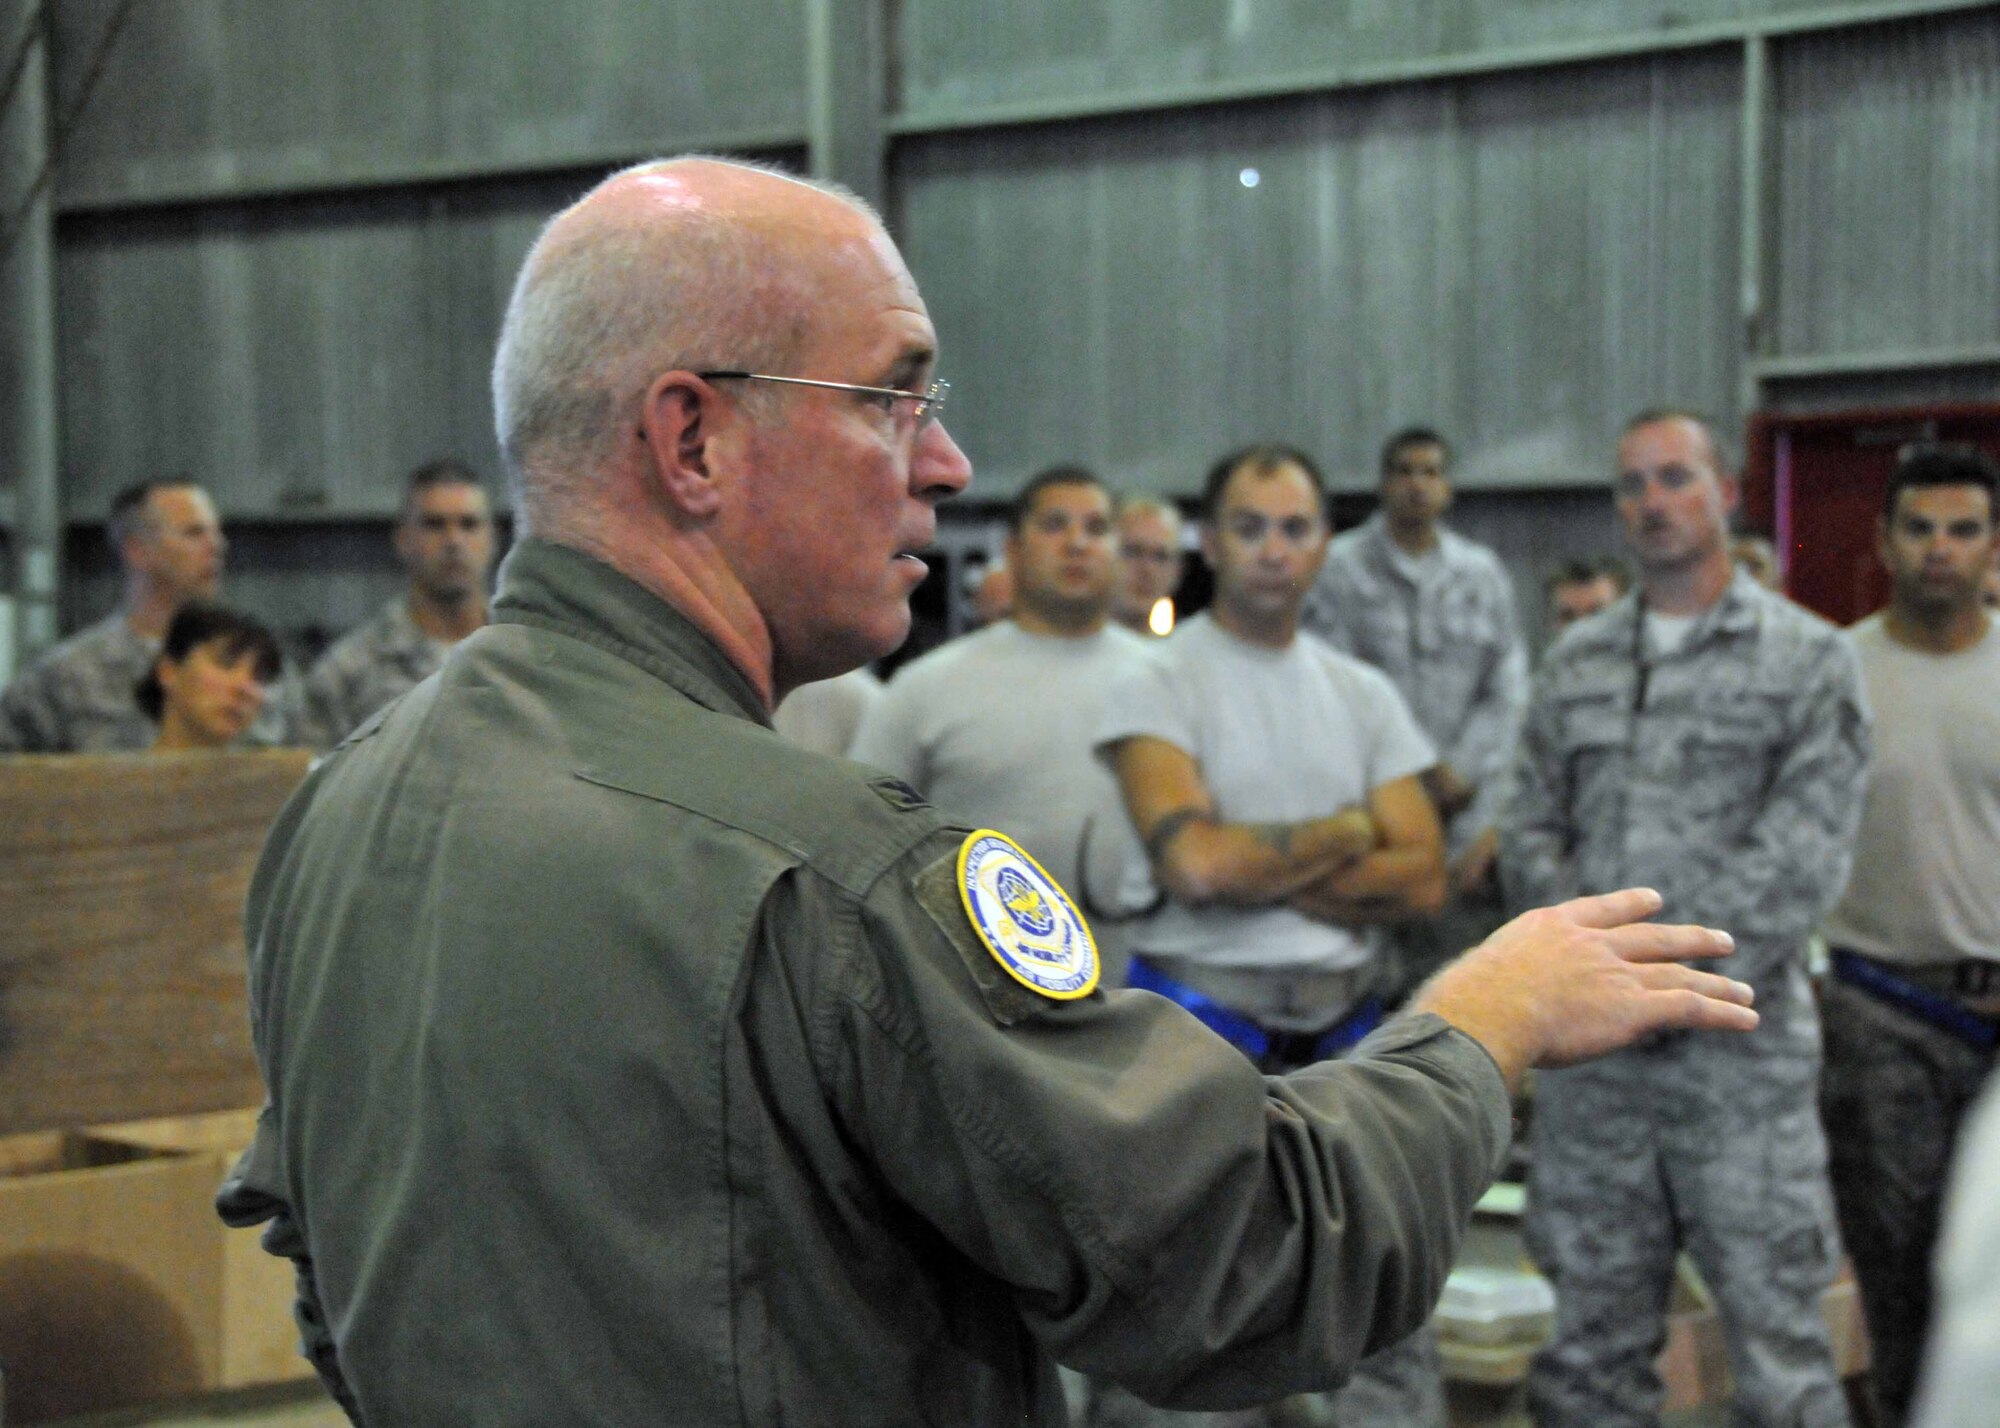 Col. John Quinn, 313th Air Expeditionary Wing vice commander, briefs aircraft maintenance personnel on the current mission status and takes questions from Airmen on July 26, 2011, at a base in Western Europe. (U.S. Air Force photo/Capt. John Capra)